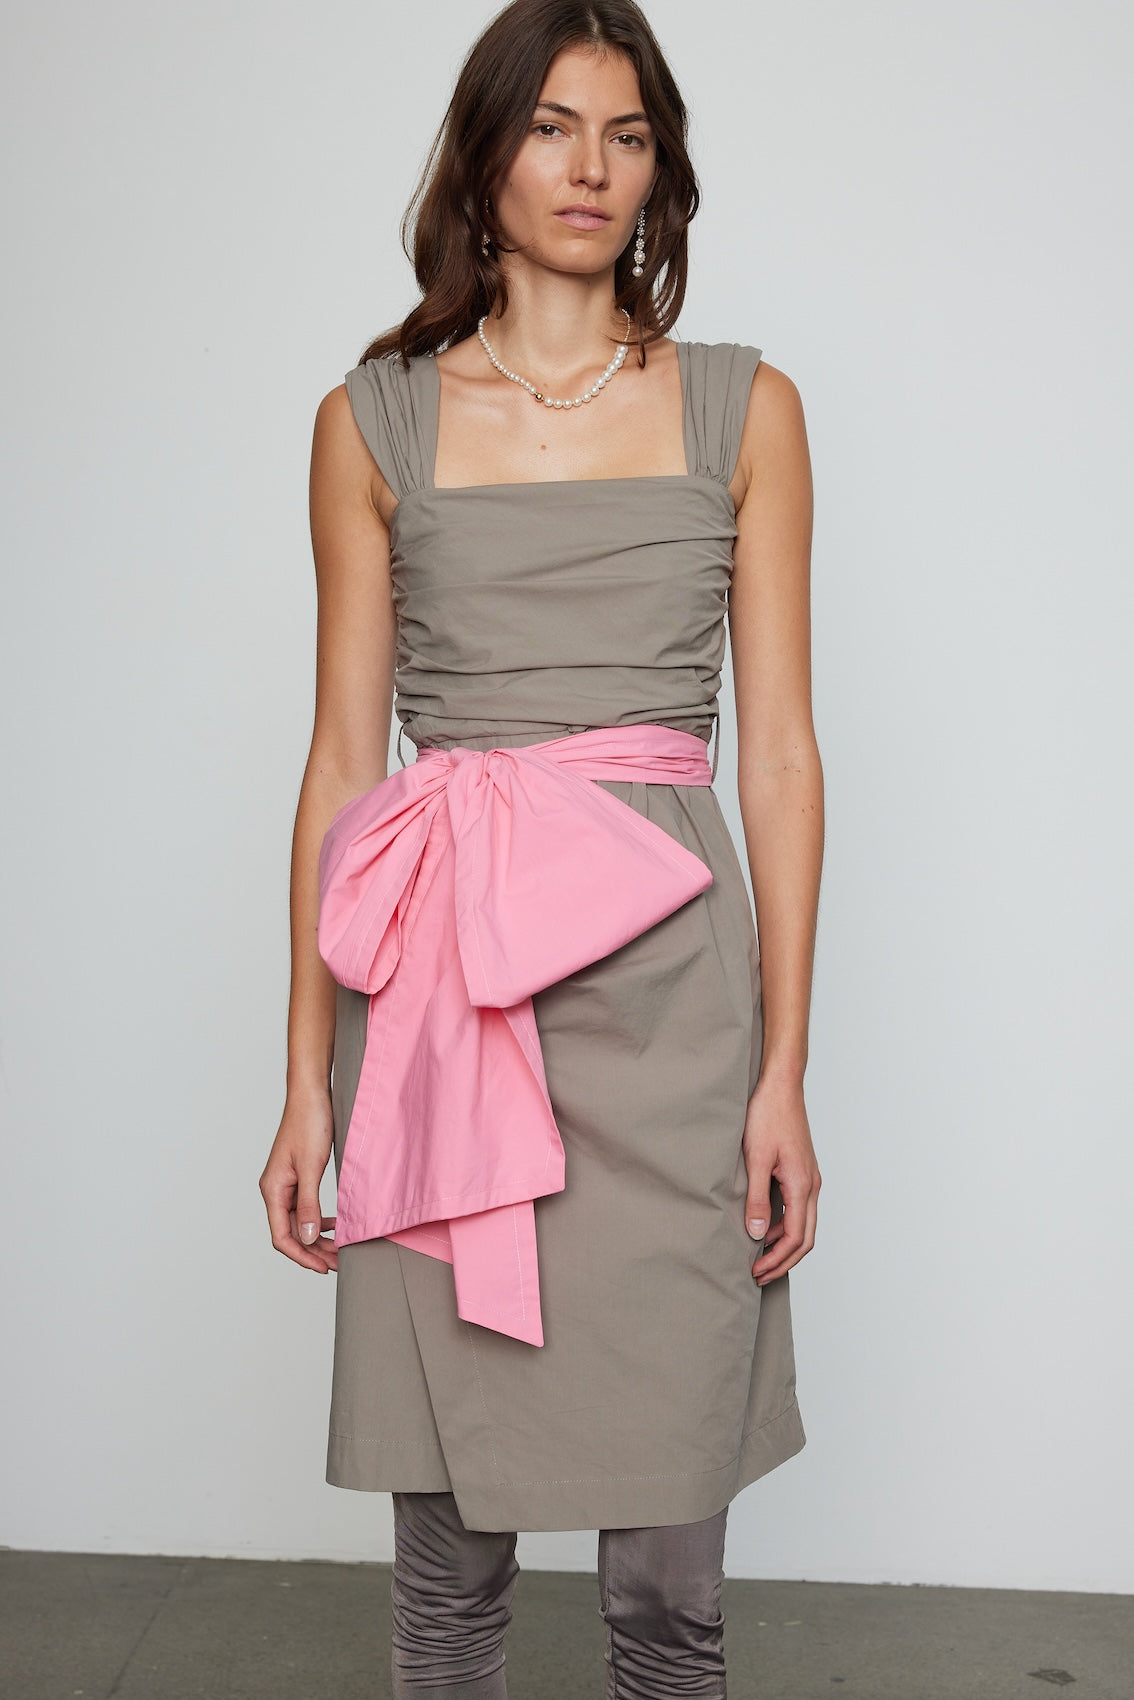 Caro Editions Sophie Dress is a classic dress with a big detachable bow detail on the side. The Dress features wide straps, a slit, and a fitted waist. The dress is made in lightweight cotton poplin. Both the bow and the belt in pink can is detachable.